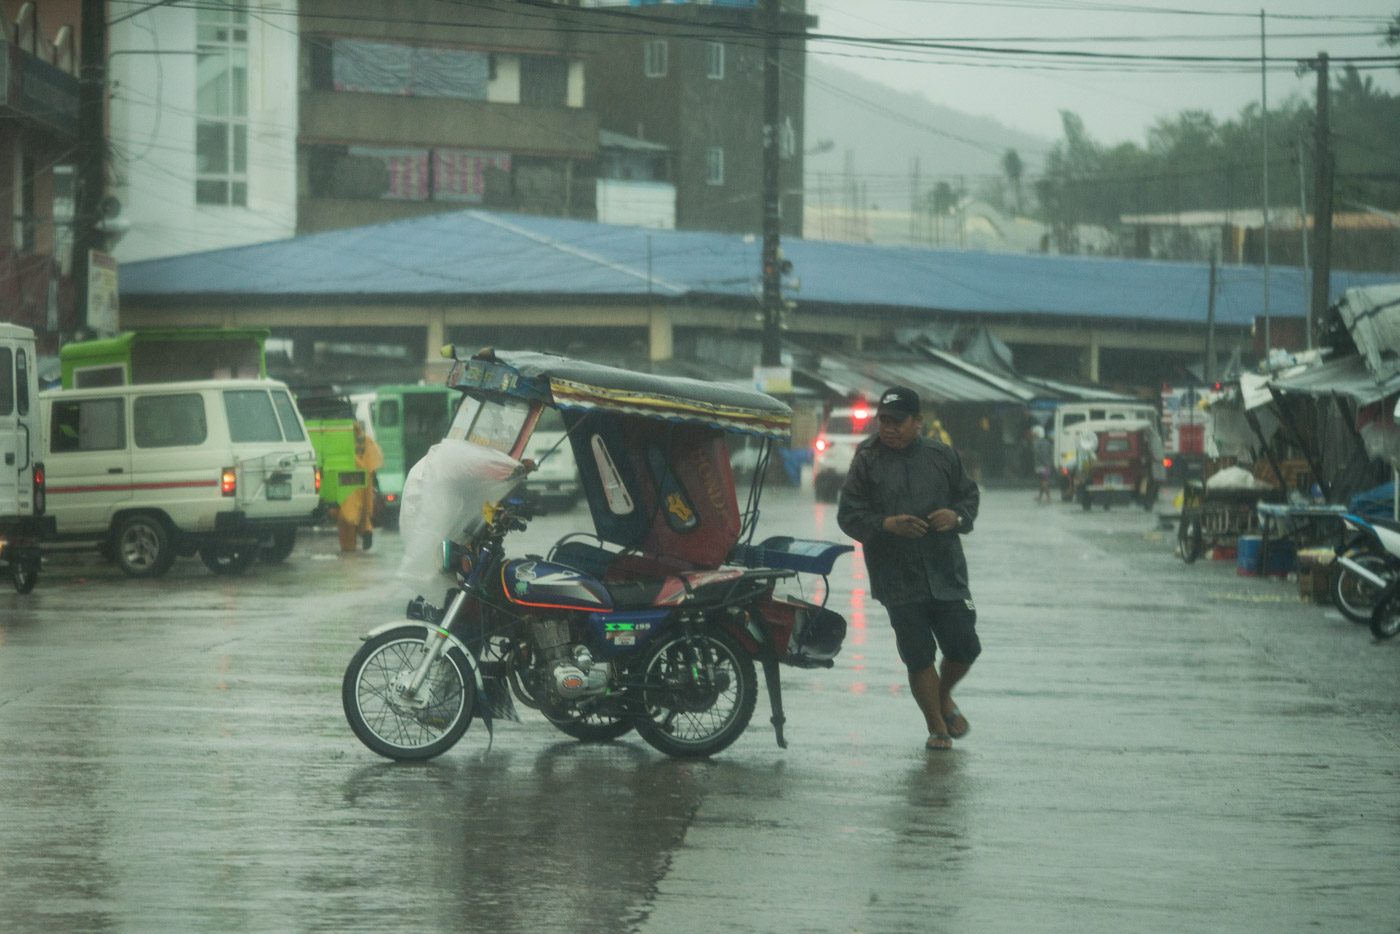 STRONG WINDS. A man runs for his tricycle as it is moved by strong winds in Tacloban City